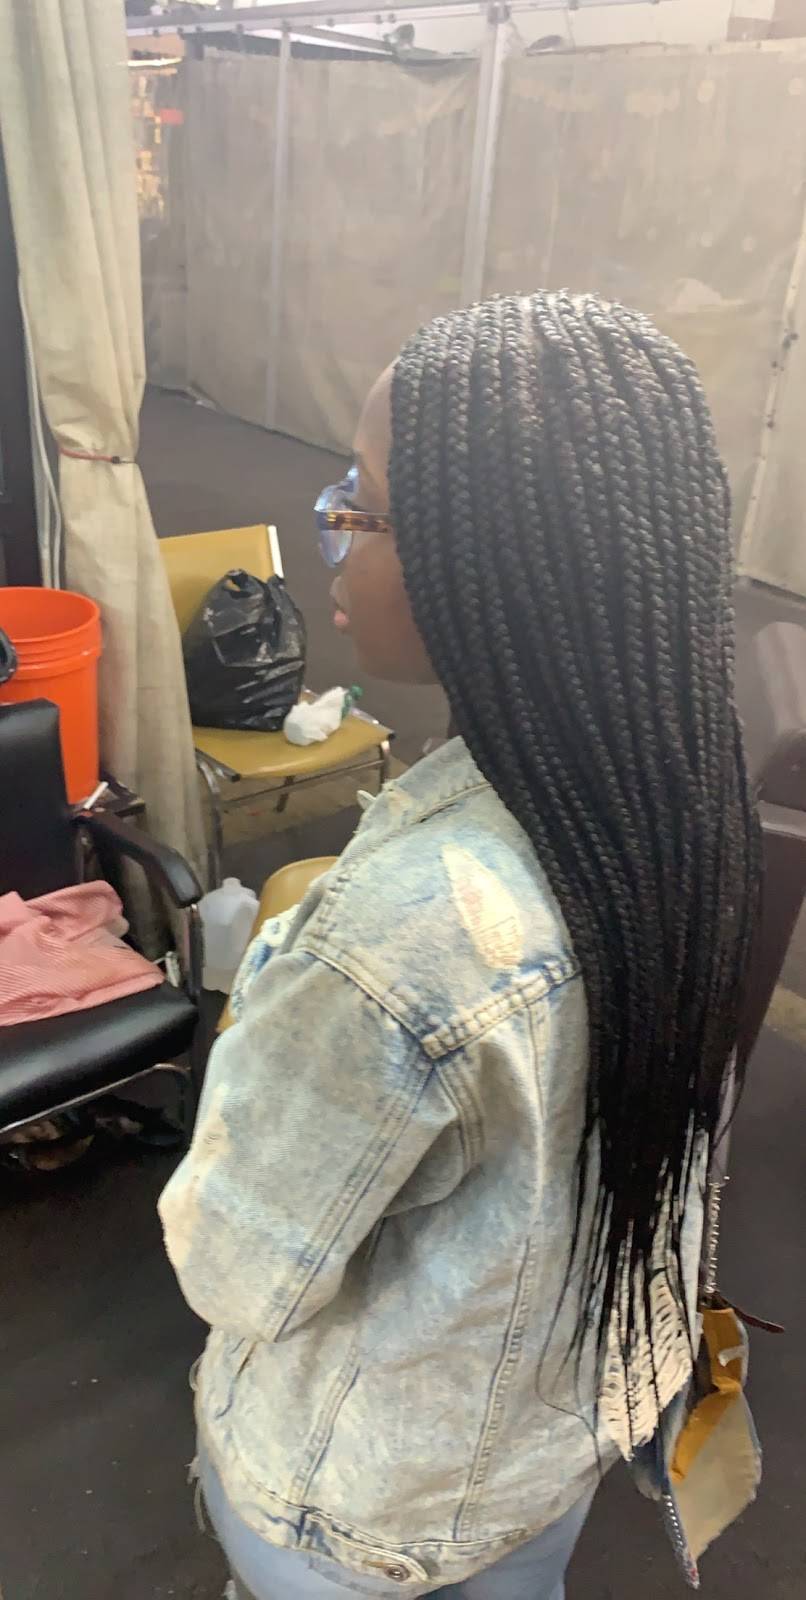 Miriam’s African Hair Braiding | In The Unique Mall, 92-18 Guy R Brewer Blvd, Queens, NY 11432, USA | Phone: (917) 582-7896